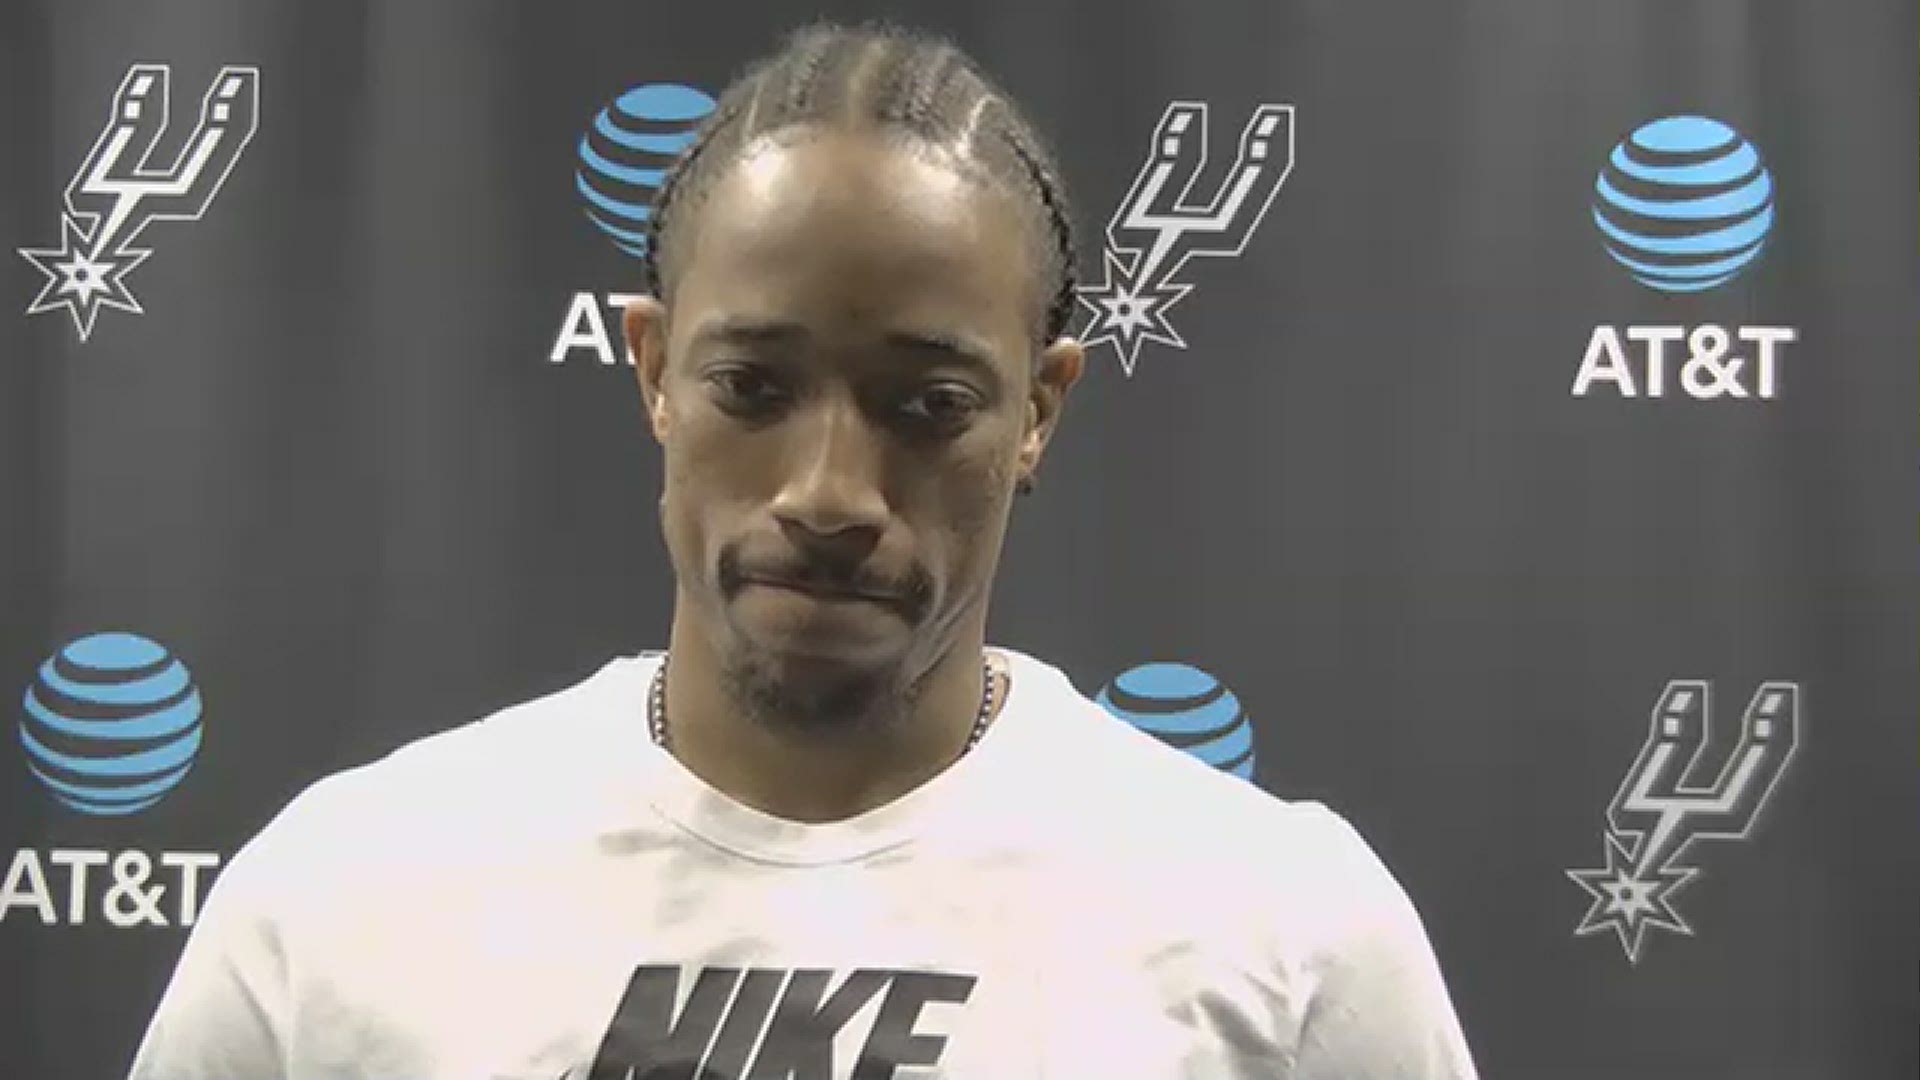 DeRozan spoke to the media for the first time since losing his father about basketball as an escape and getting through the loss with his mom and kids.